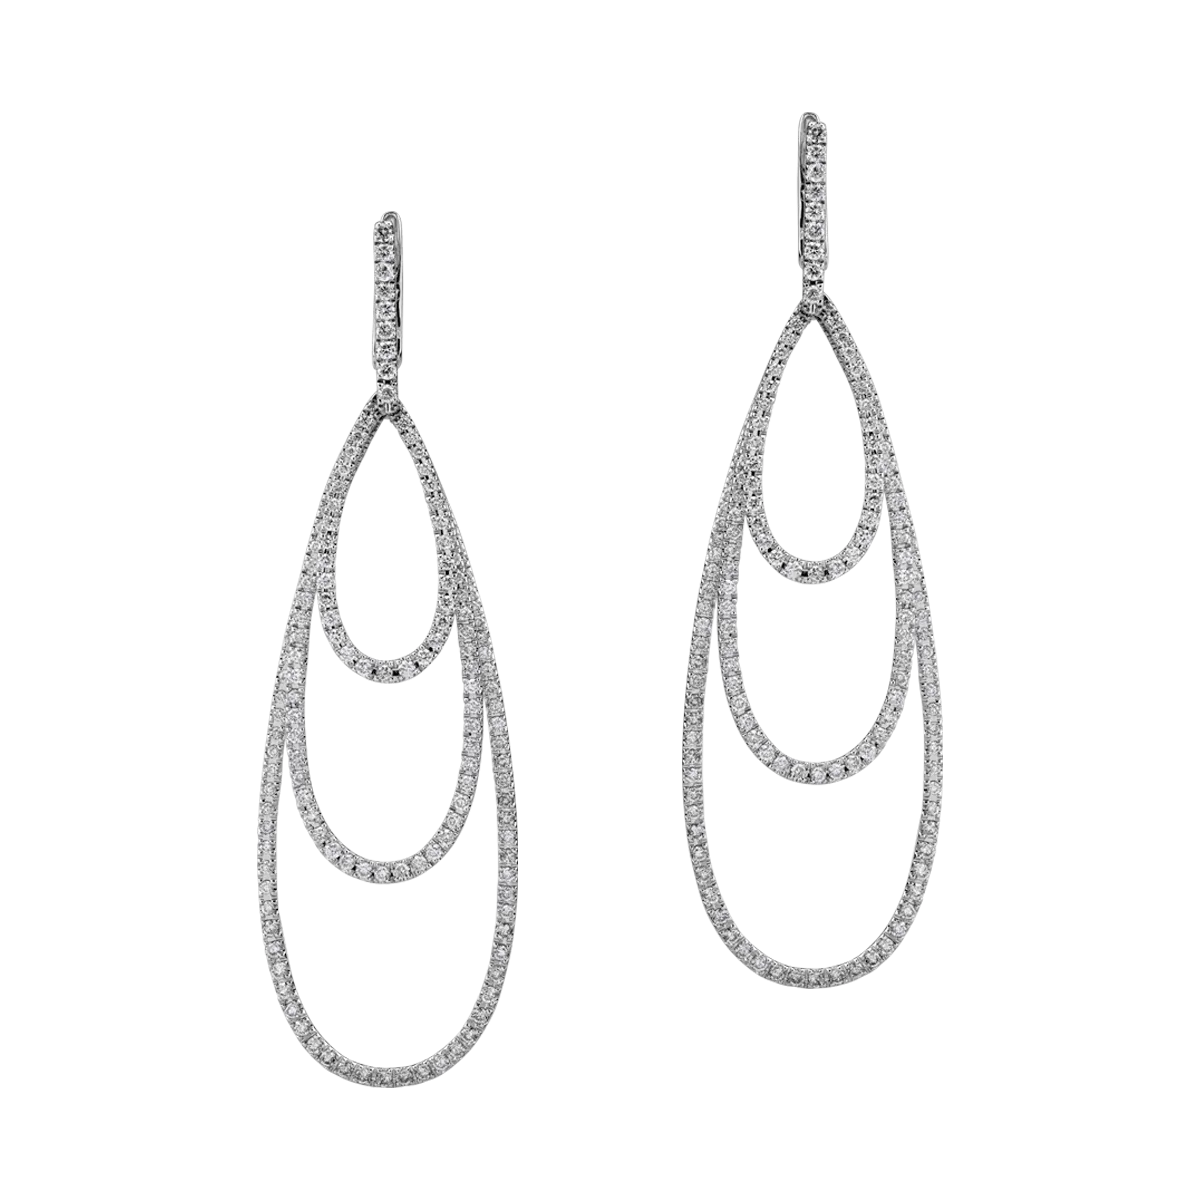 18K white gold earrings with 1.87ct diamonds